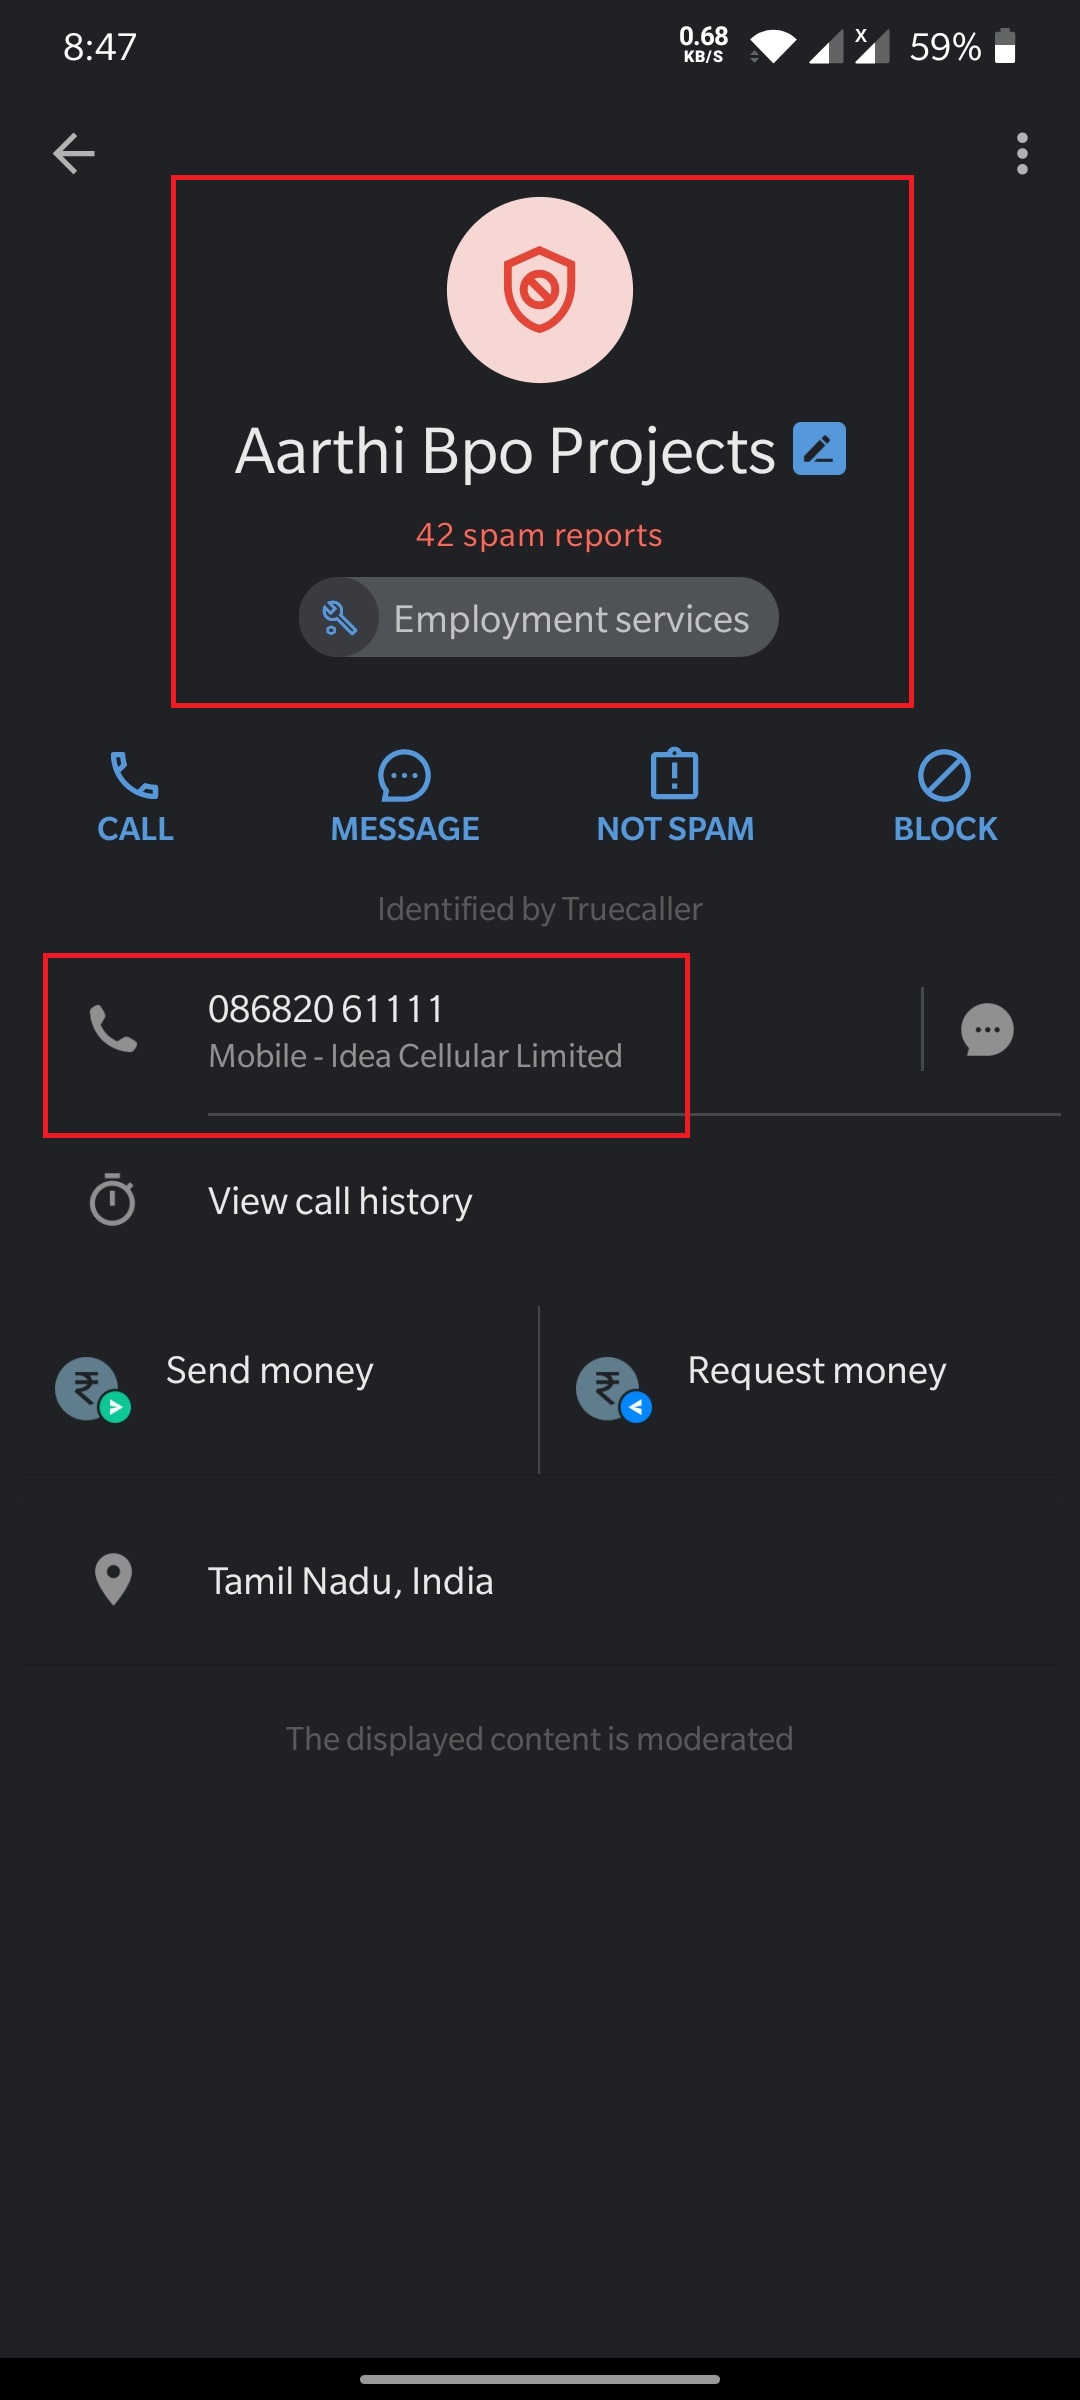 bpo projects provider india phone number truecaller spam